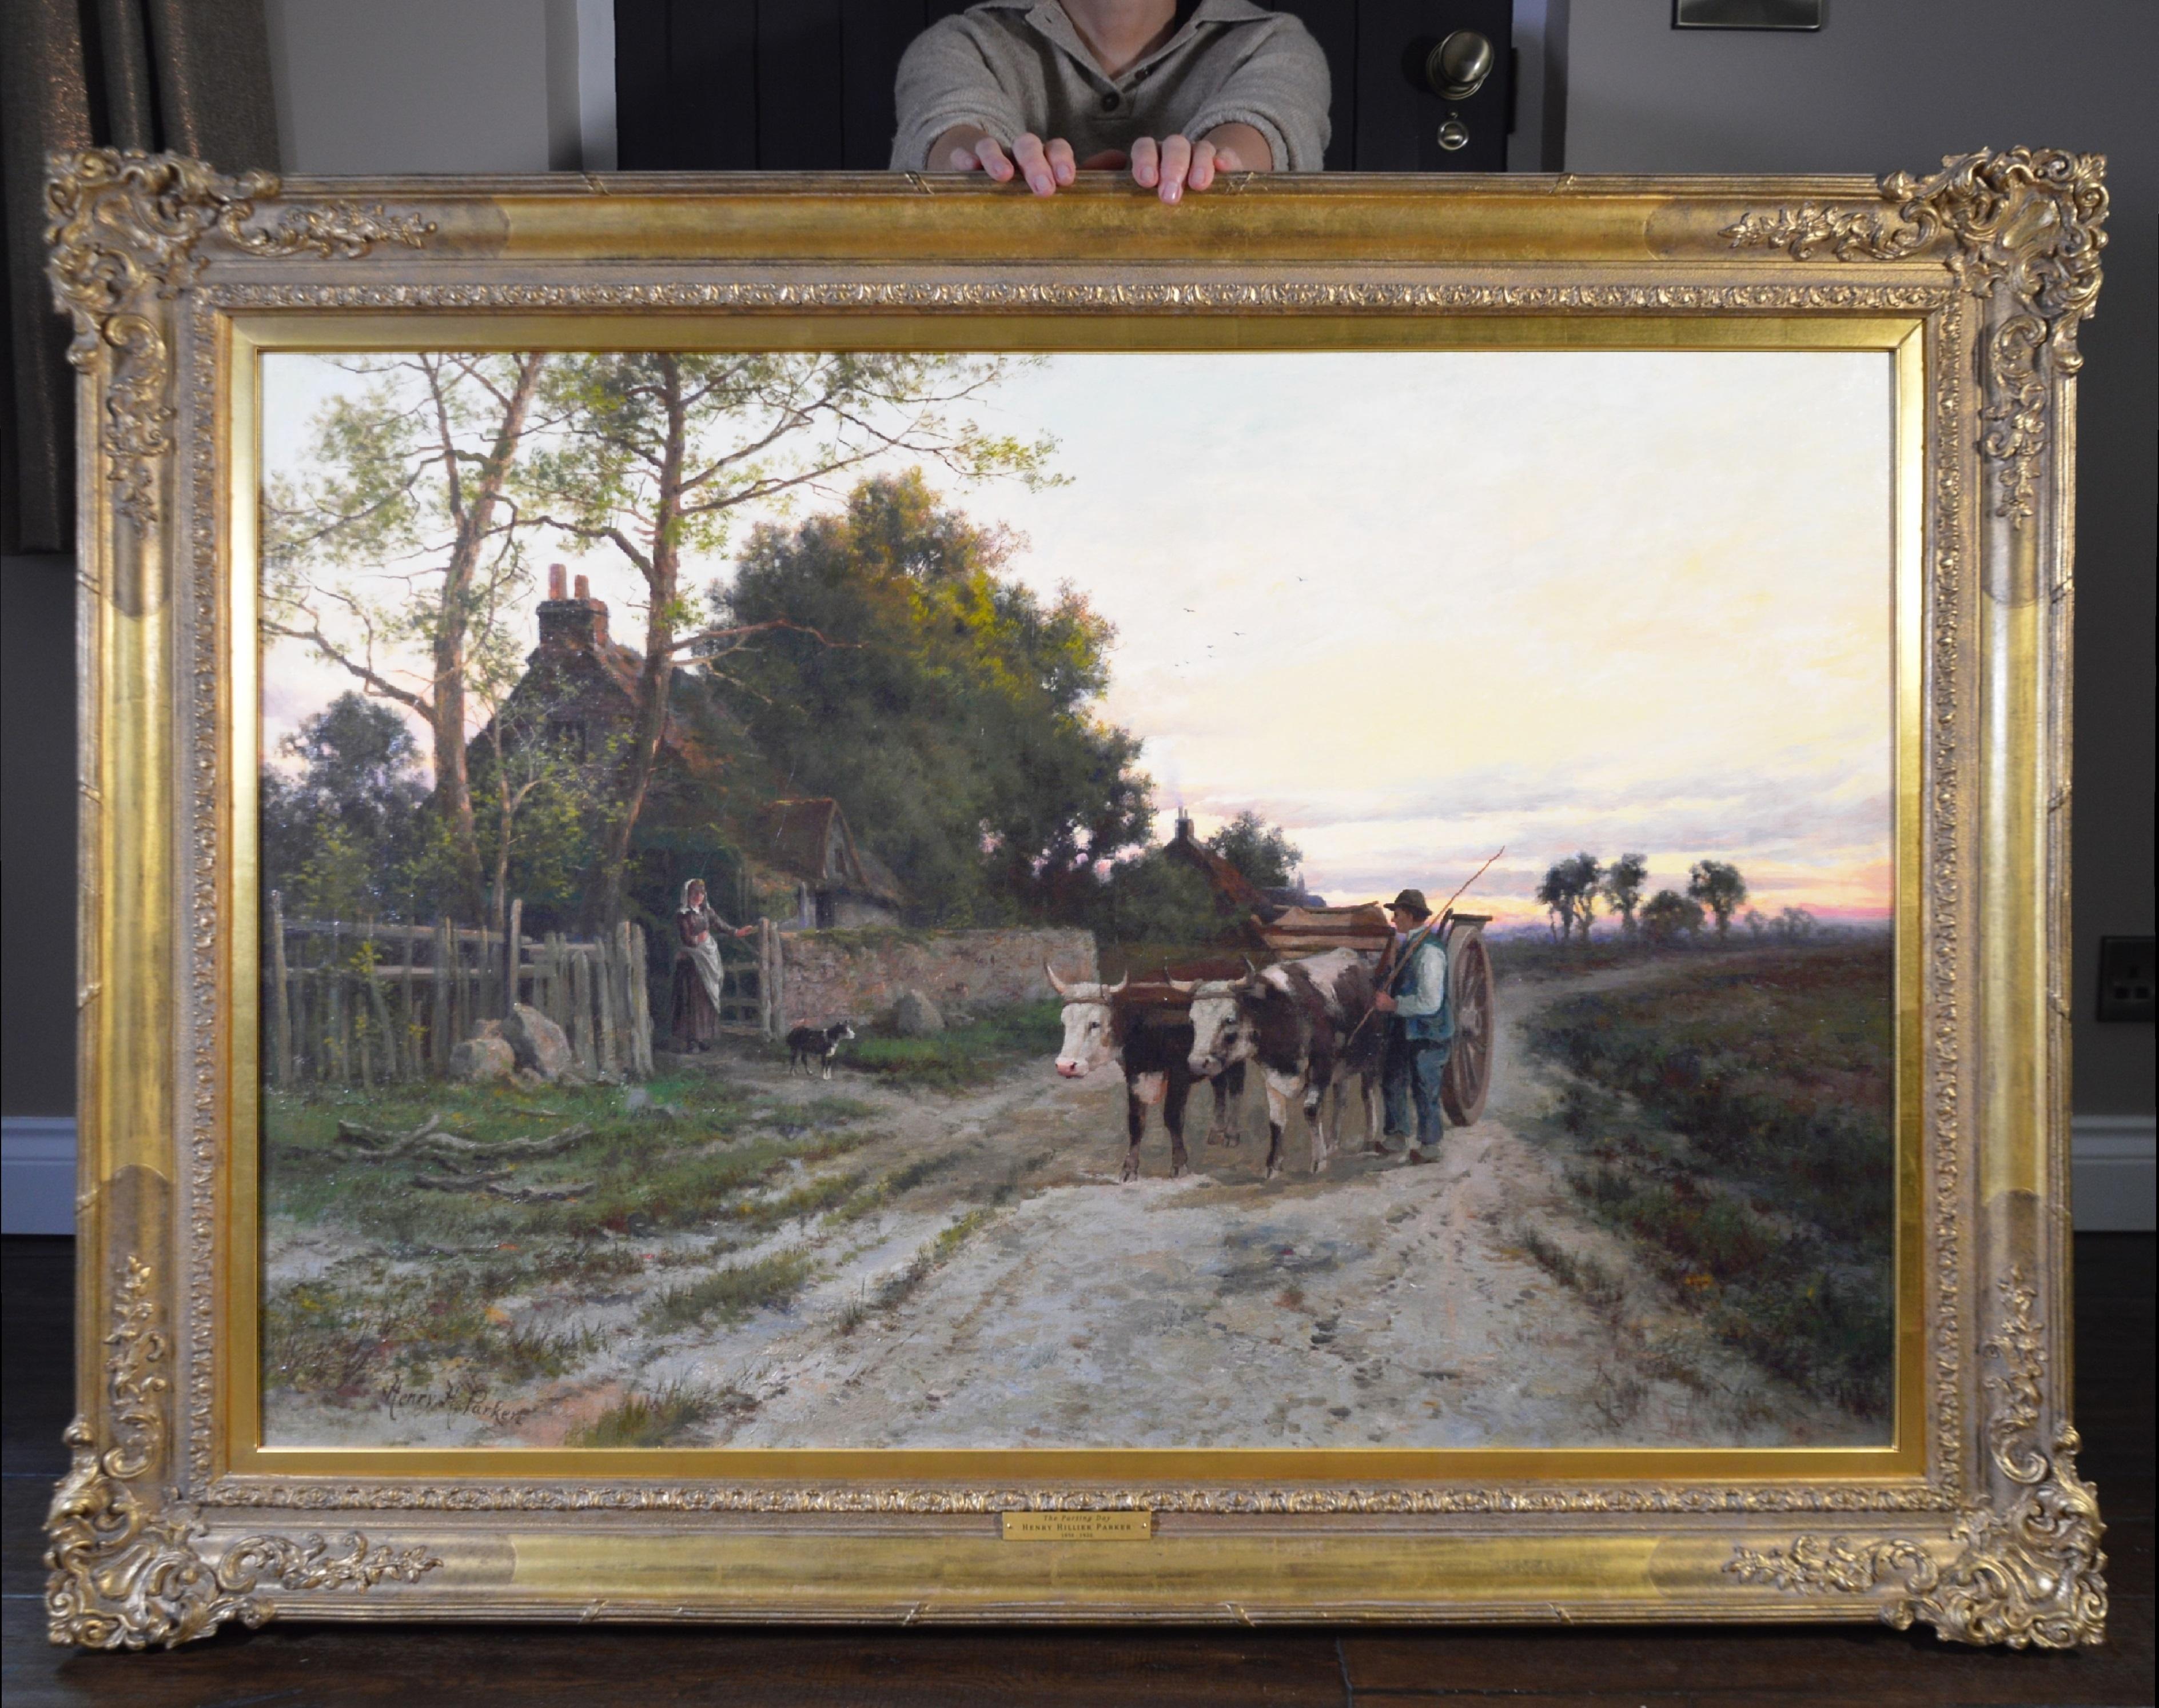 Henry H Parker Animal Painting - The Parting Day - V Large 19th Century English Sunset Landscape Oil Painting  